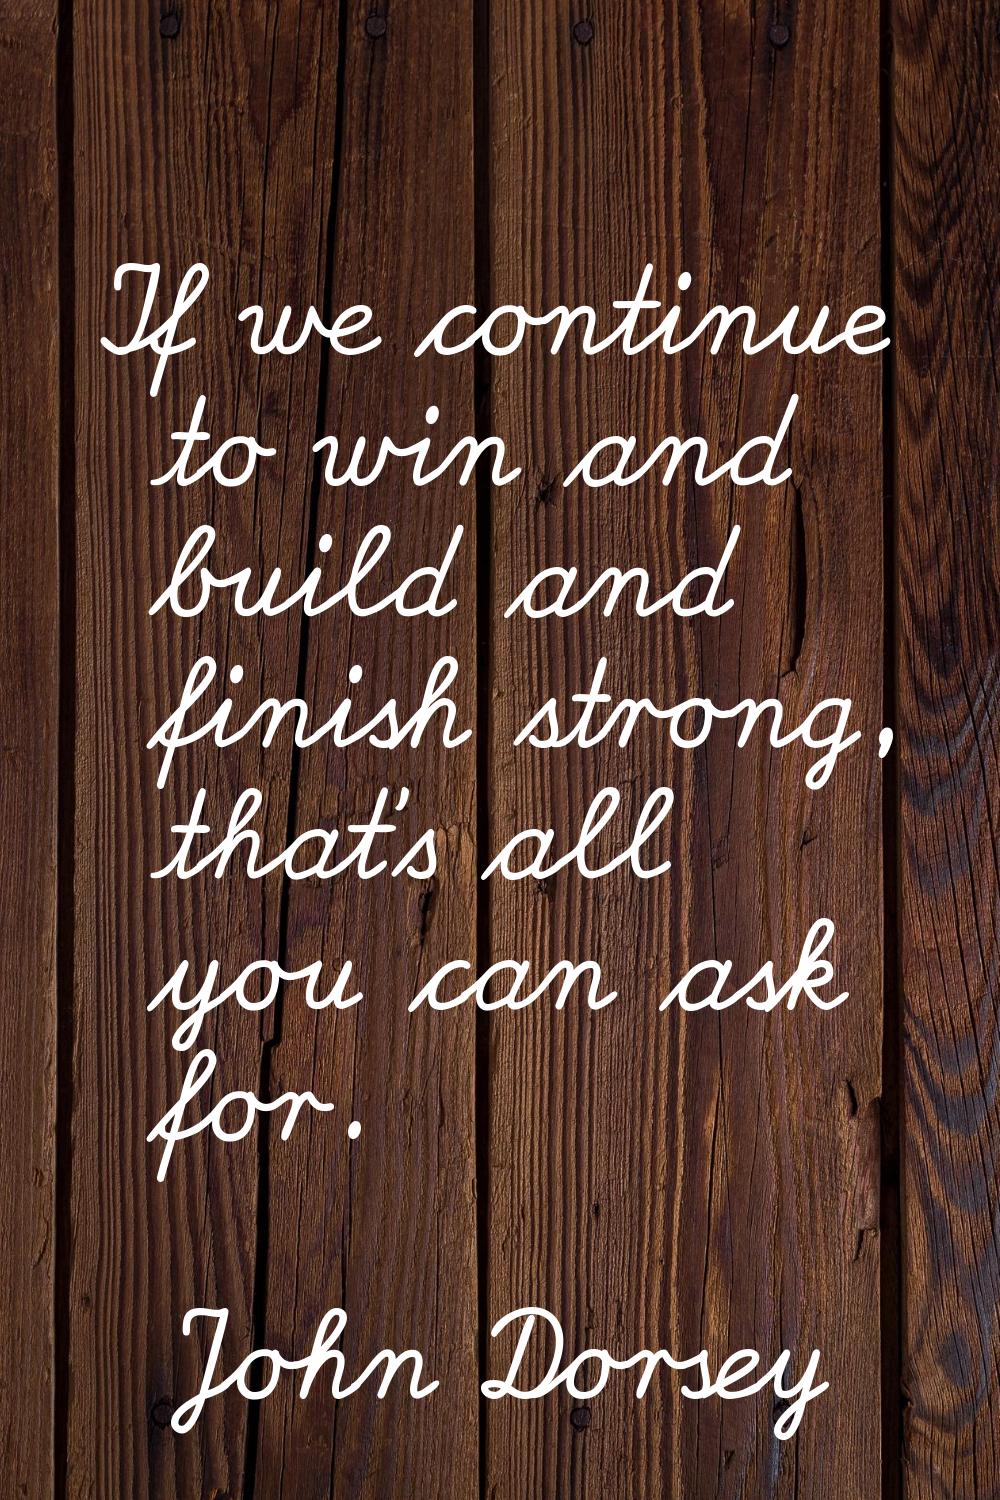 If we continue to win and build and finish strong, that's all you can ask for.